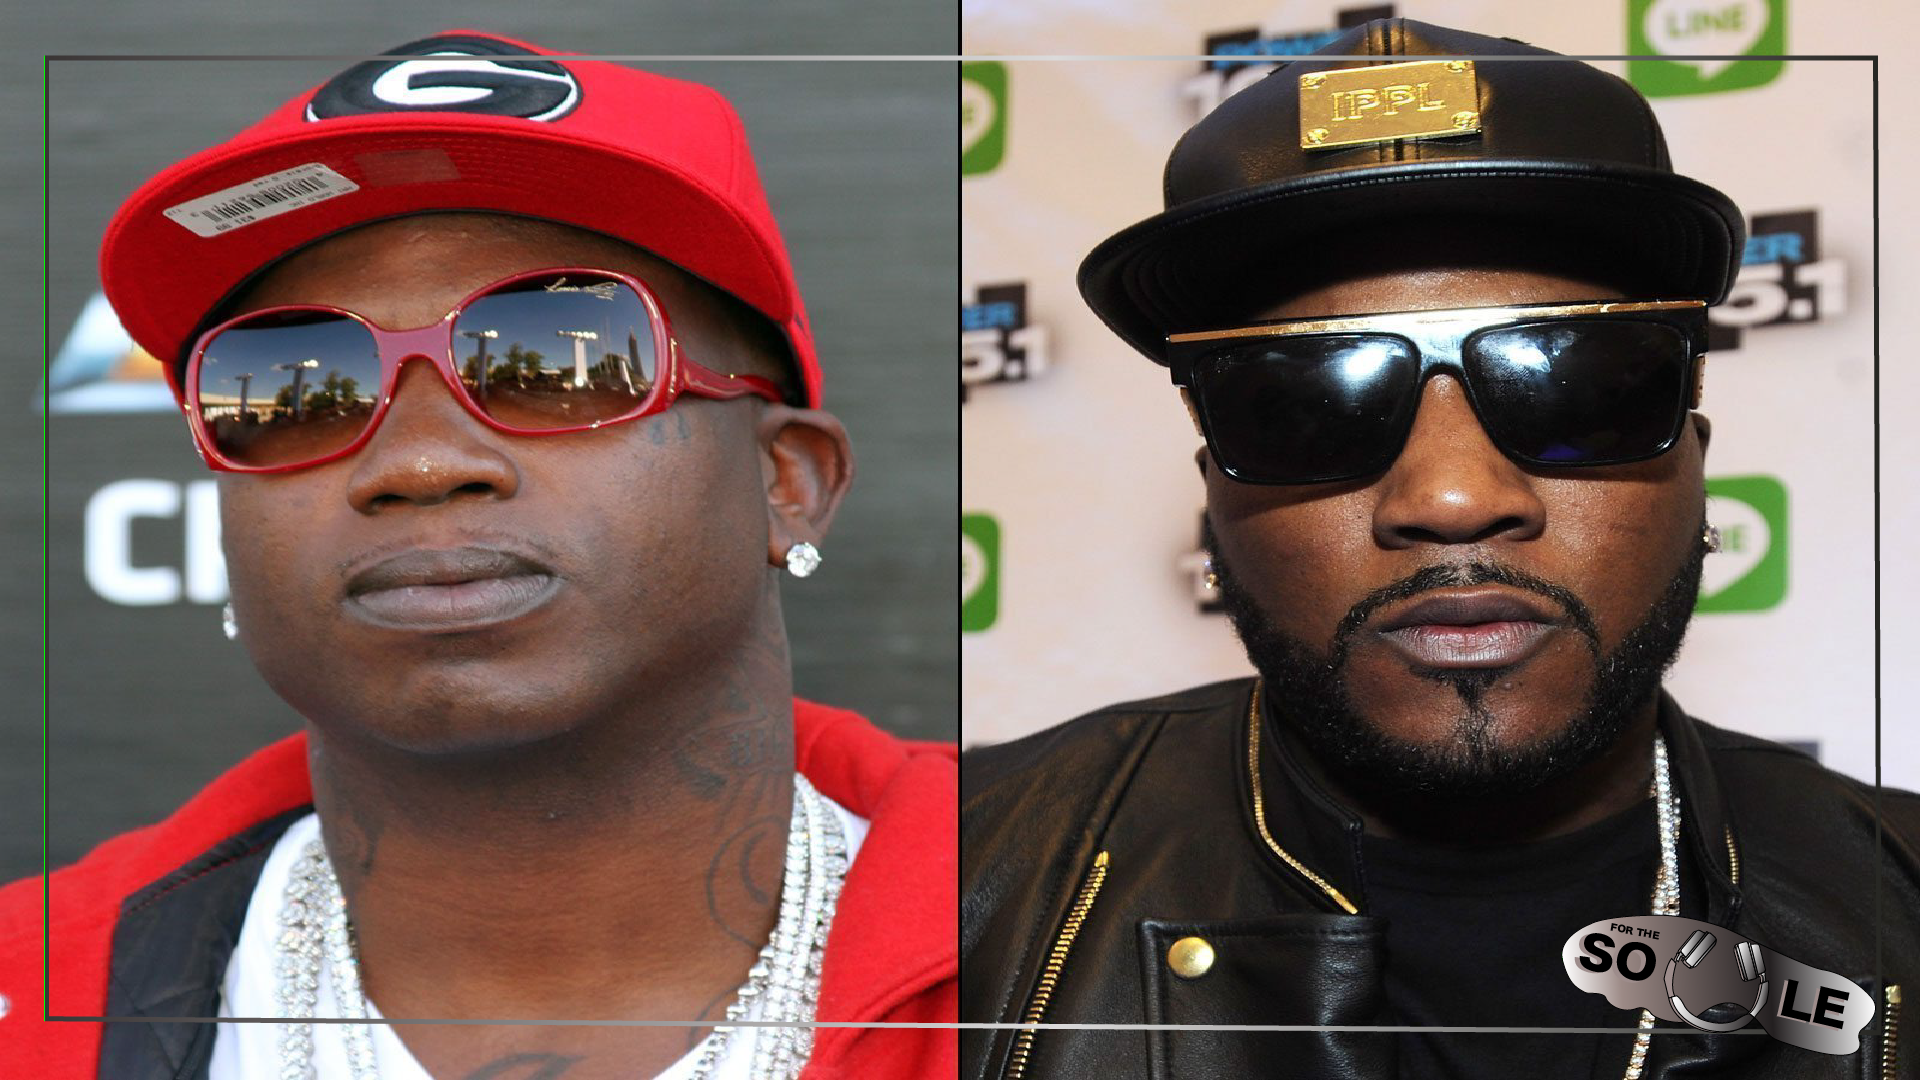 Gucci Mane or Young Jeezy — For The So[U]le